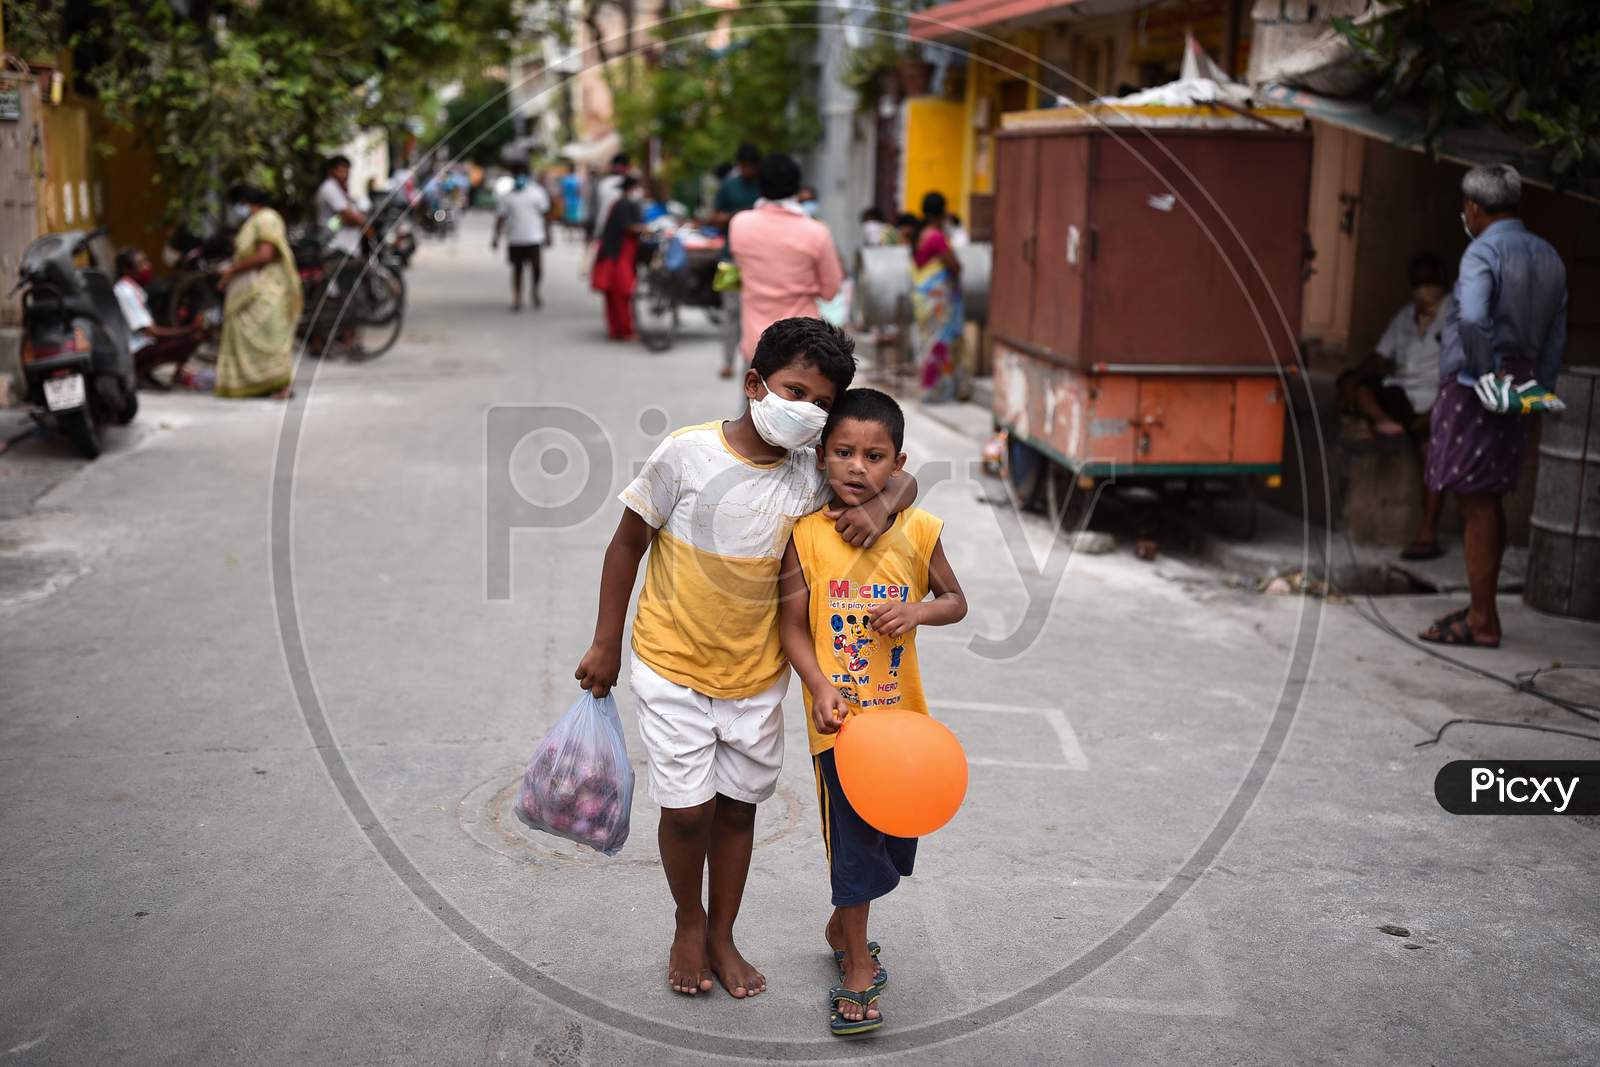 A Boy Carries Onions As He Walks With His Friend Along A Street During The Nationwide Lockdown Imposed In The Wake Of Coronavirus, In Vijayawada.